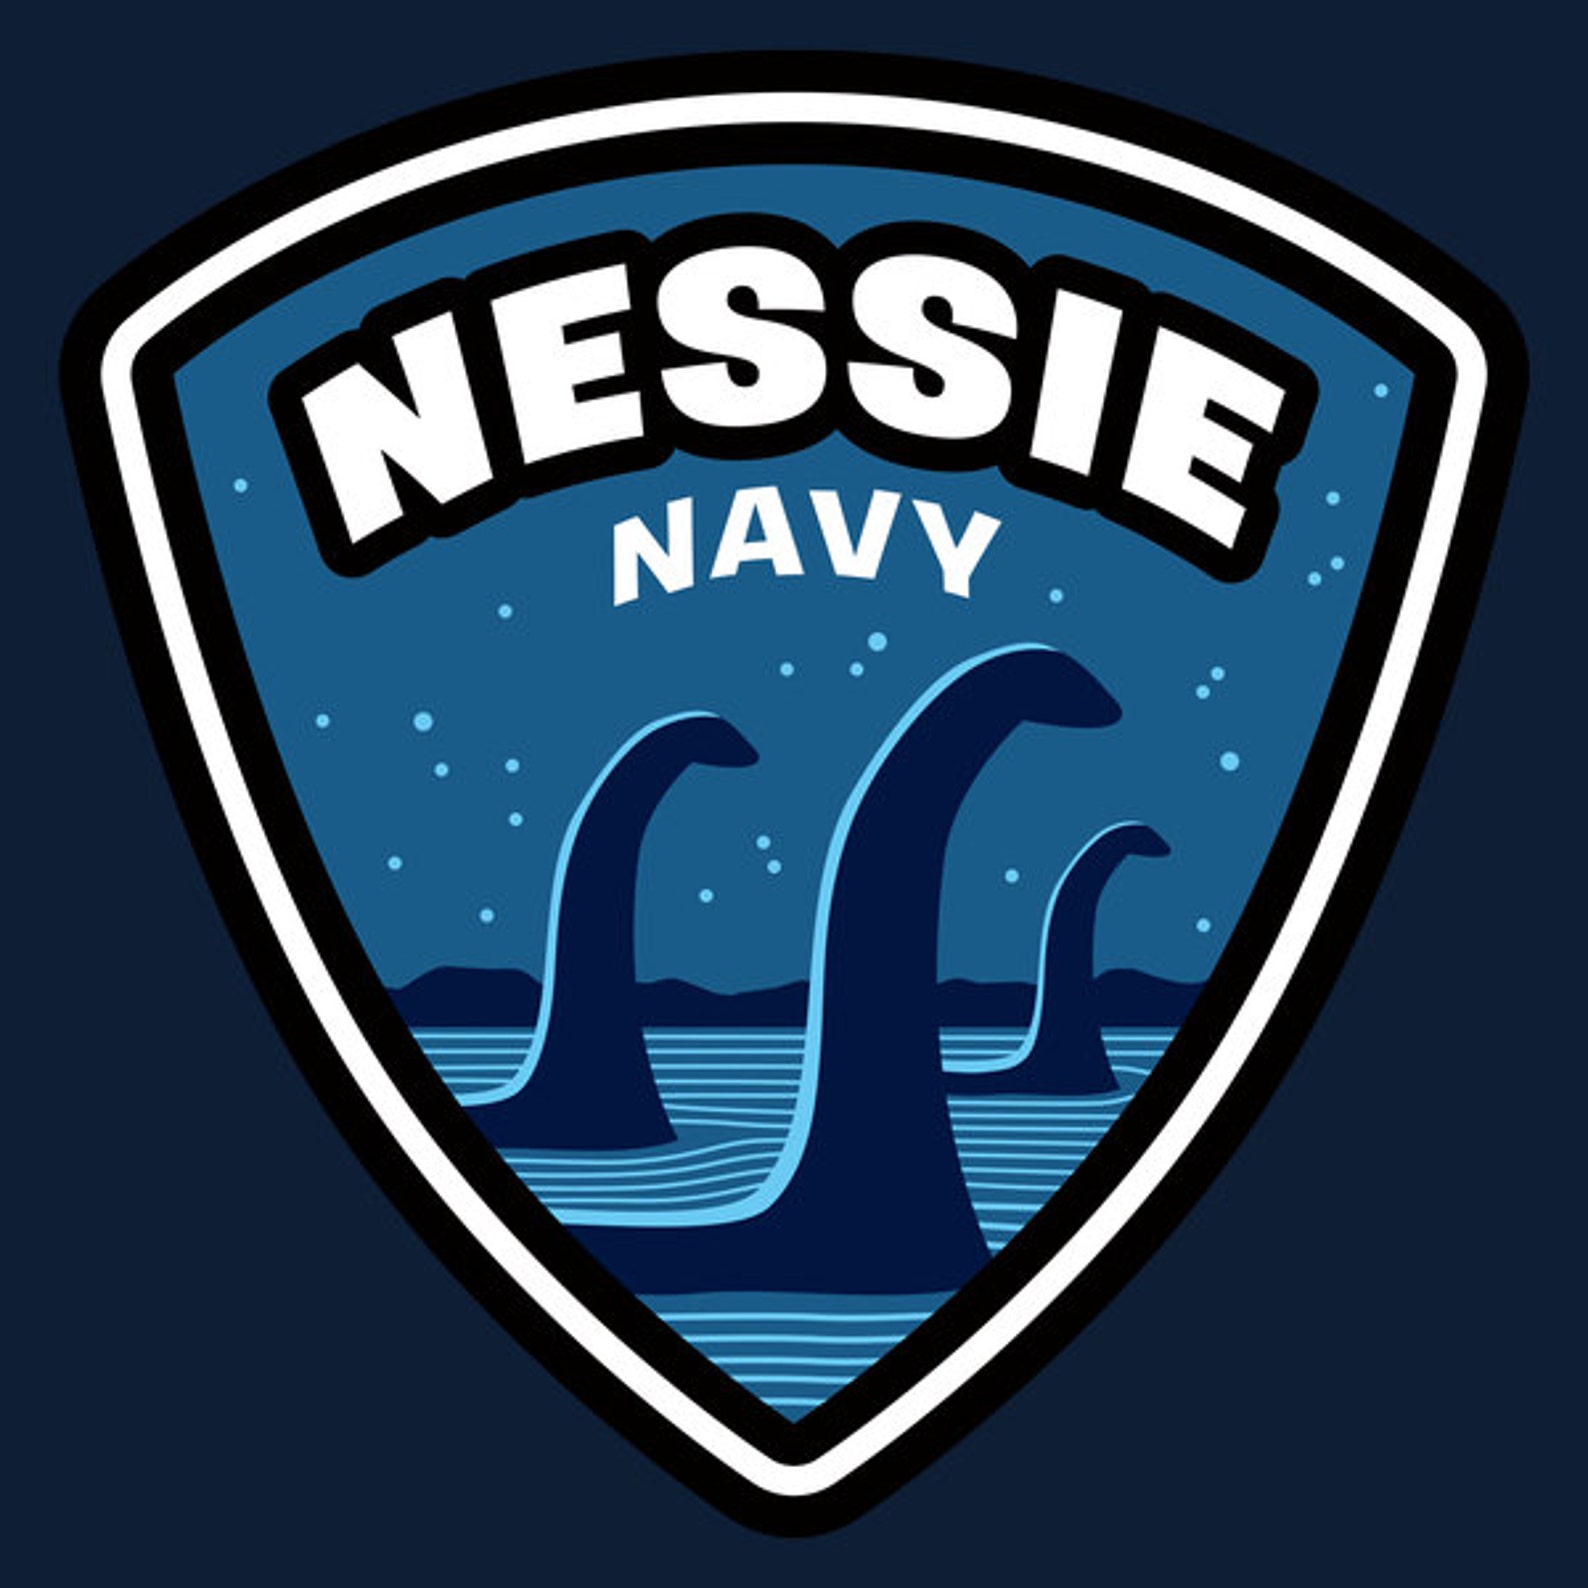 T me navy drops. Navy t Shirt. Nessie Blue. REALVINYL Nessie logo. T-Shirts with Patches.